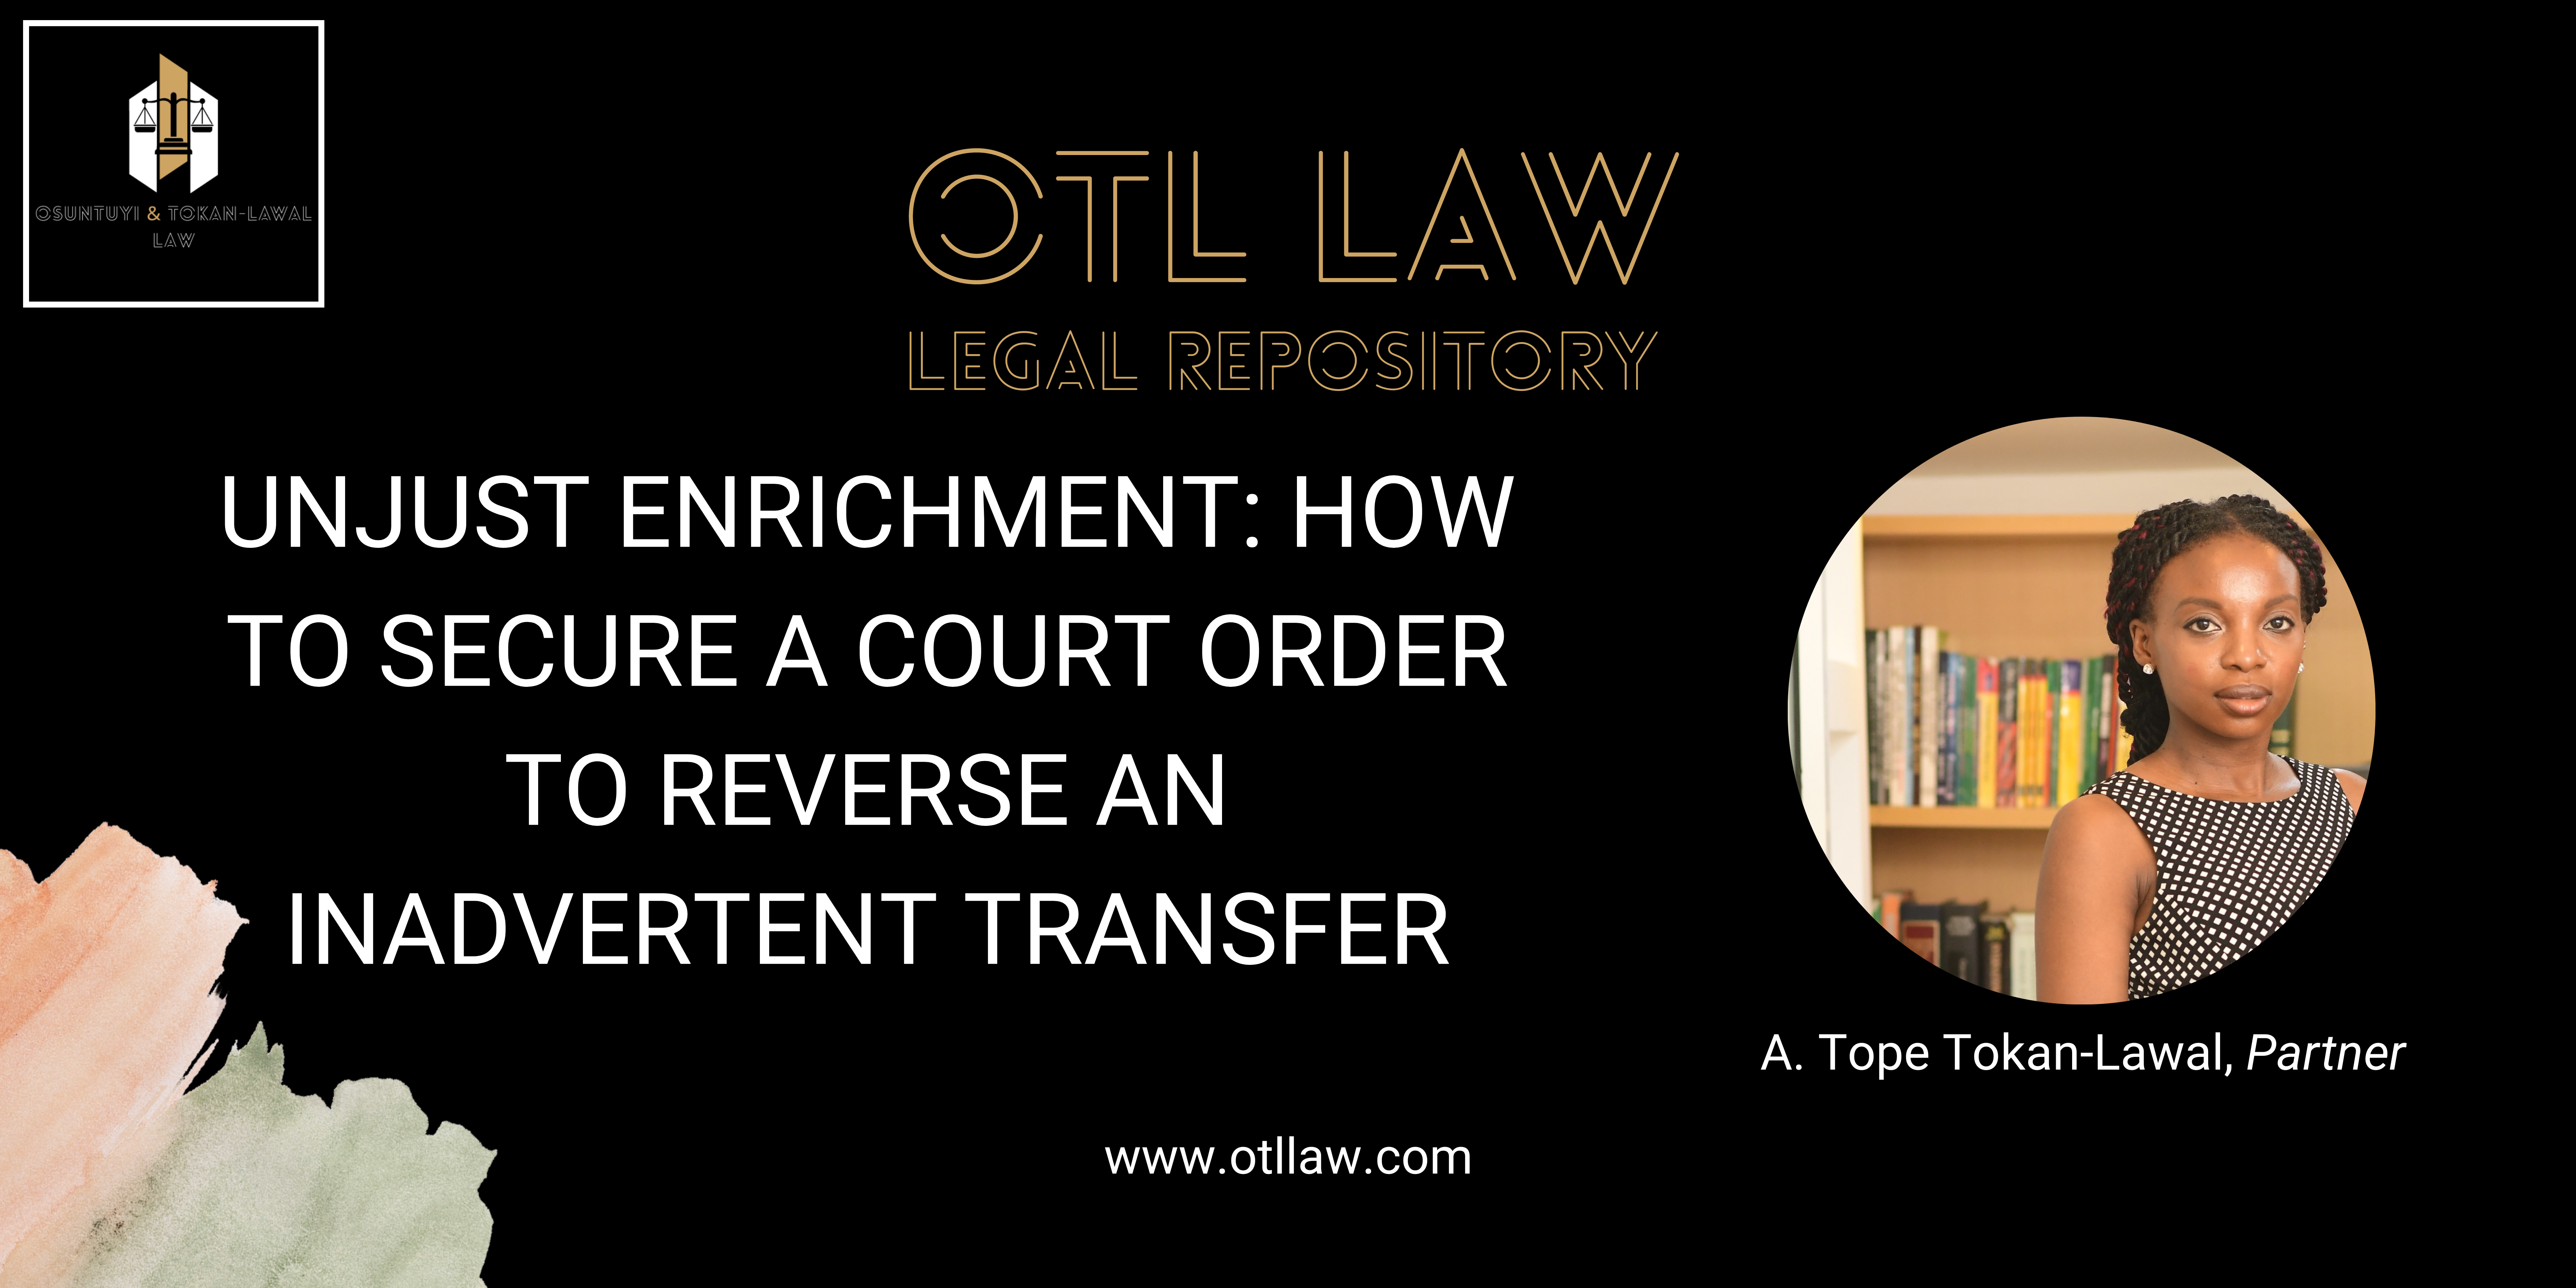 Unjust Enrichment: How to Secure a Court Order to Reverse an Inadvertent Transfer legal article